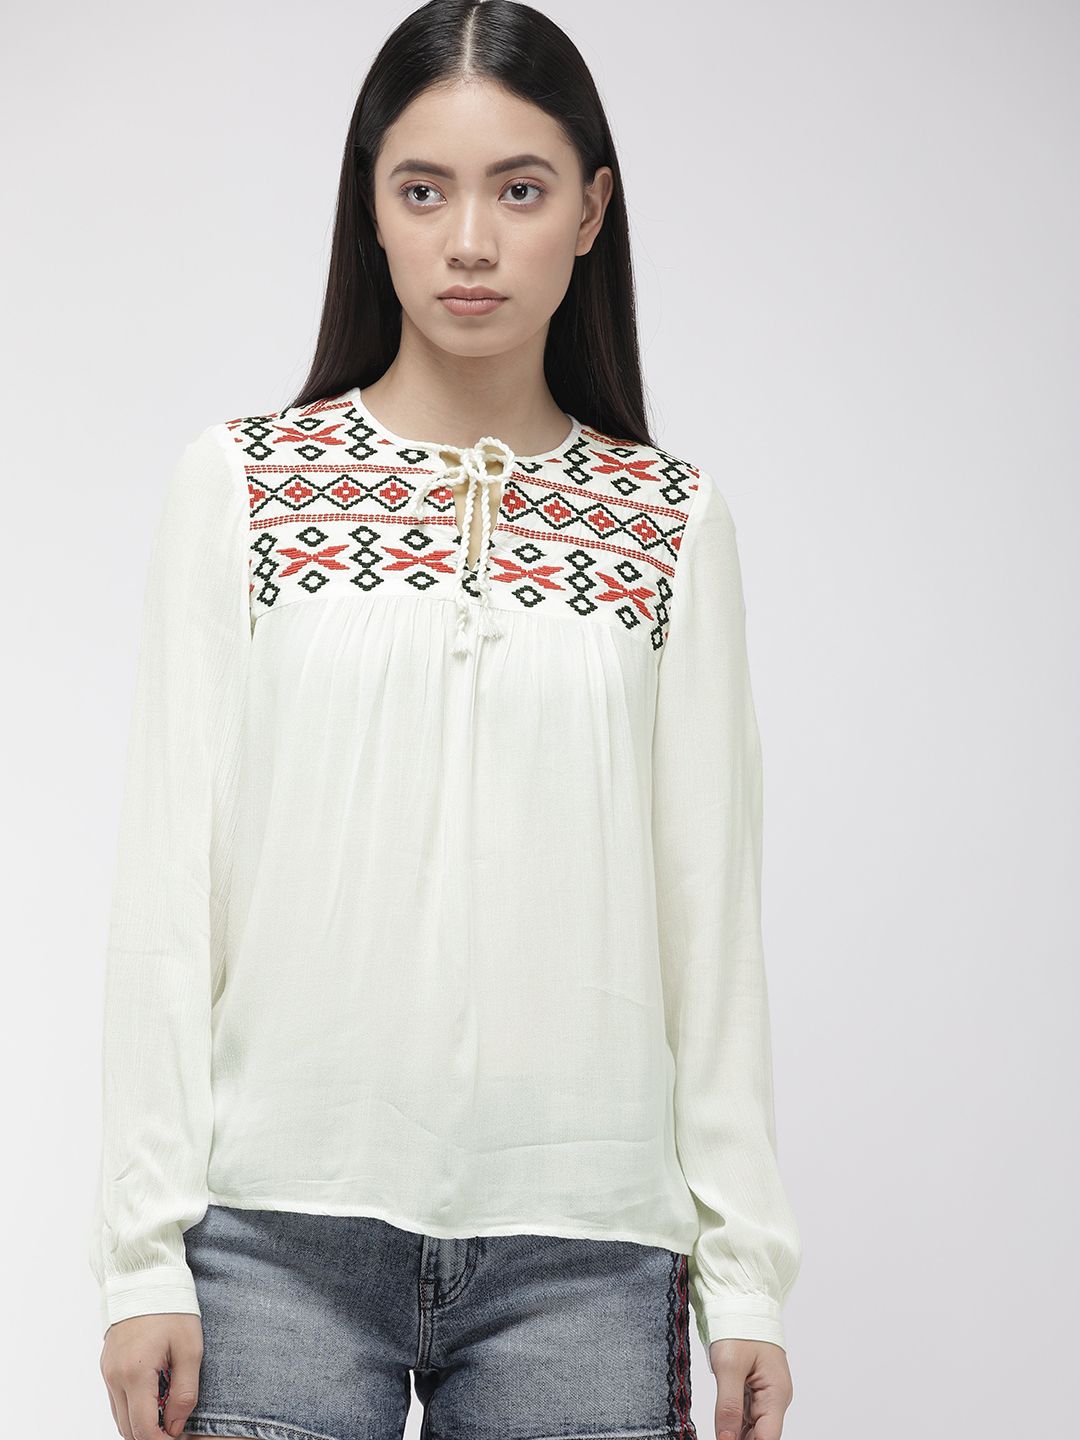 Levis Women White Embroidered Solid Top Price in India